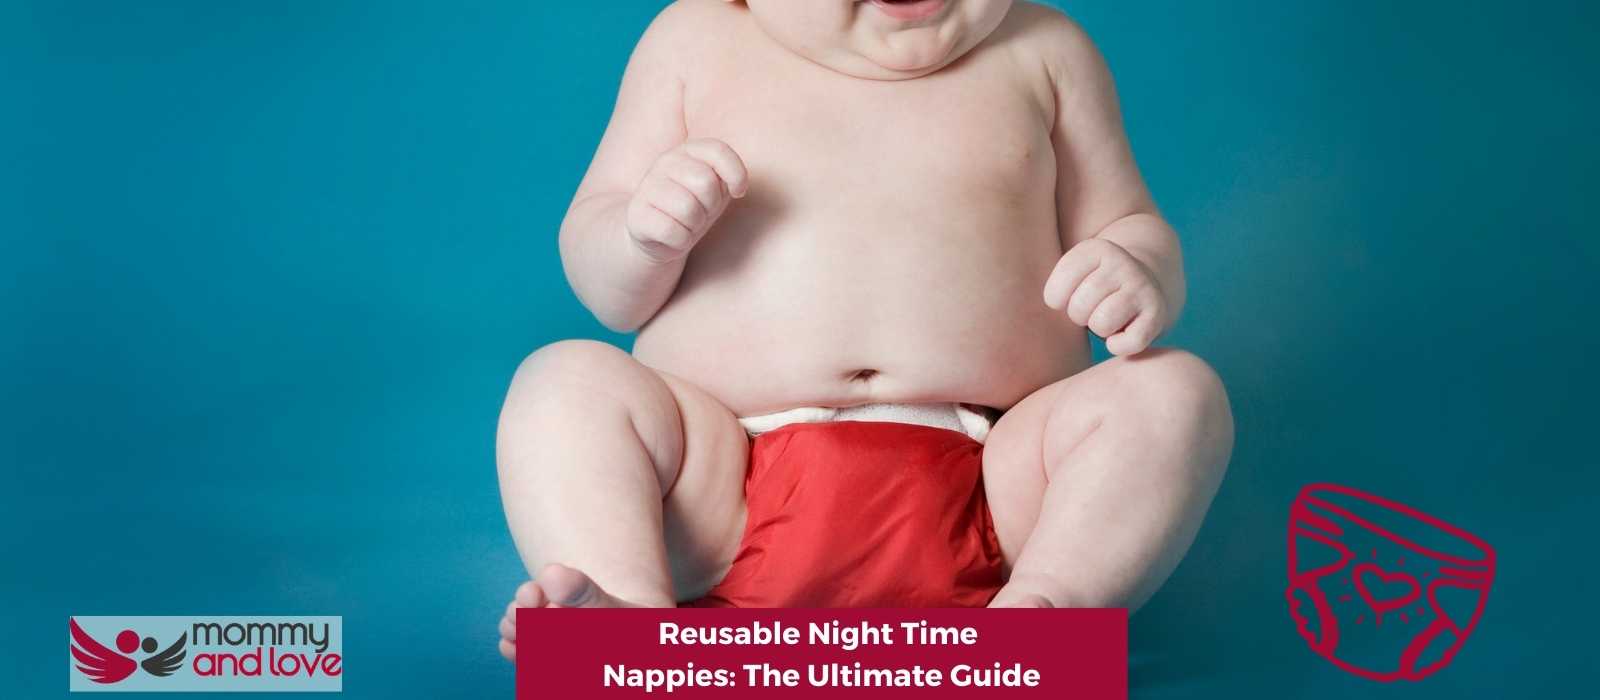 Reusable Night Time Nappies The Ultimate Guide